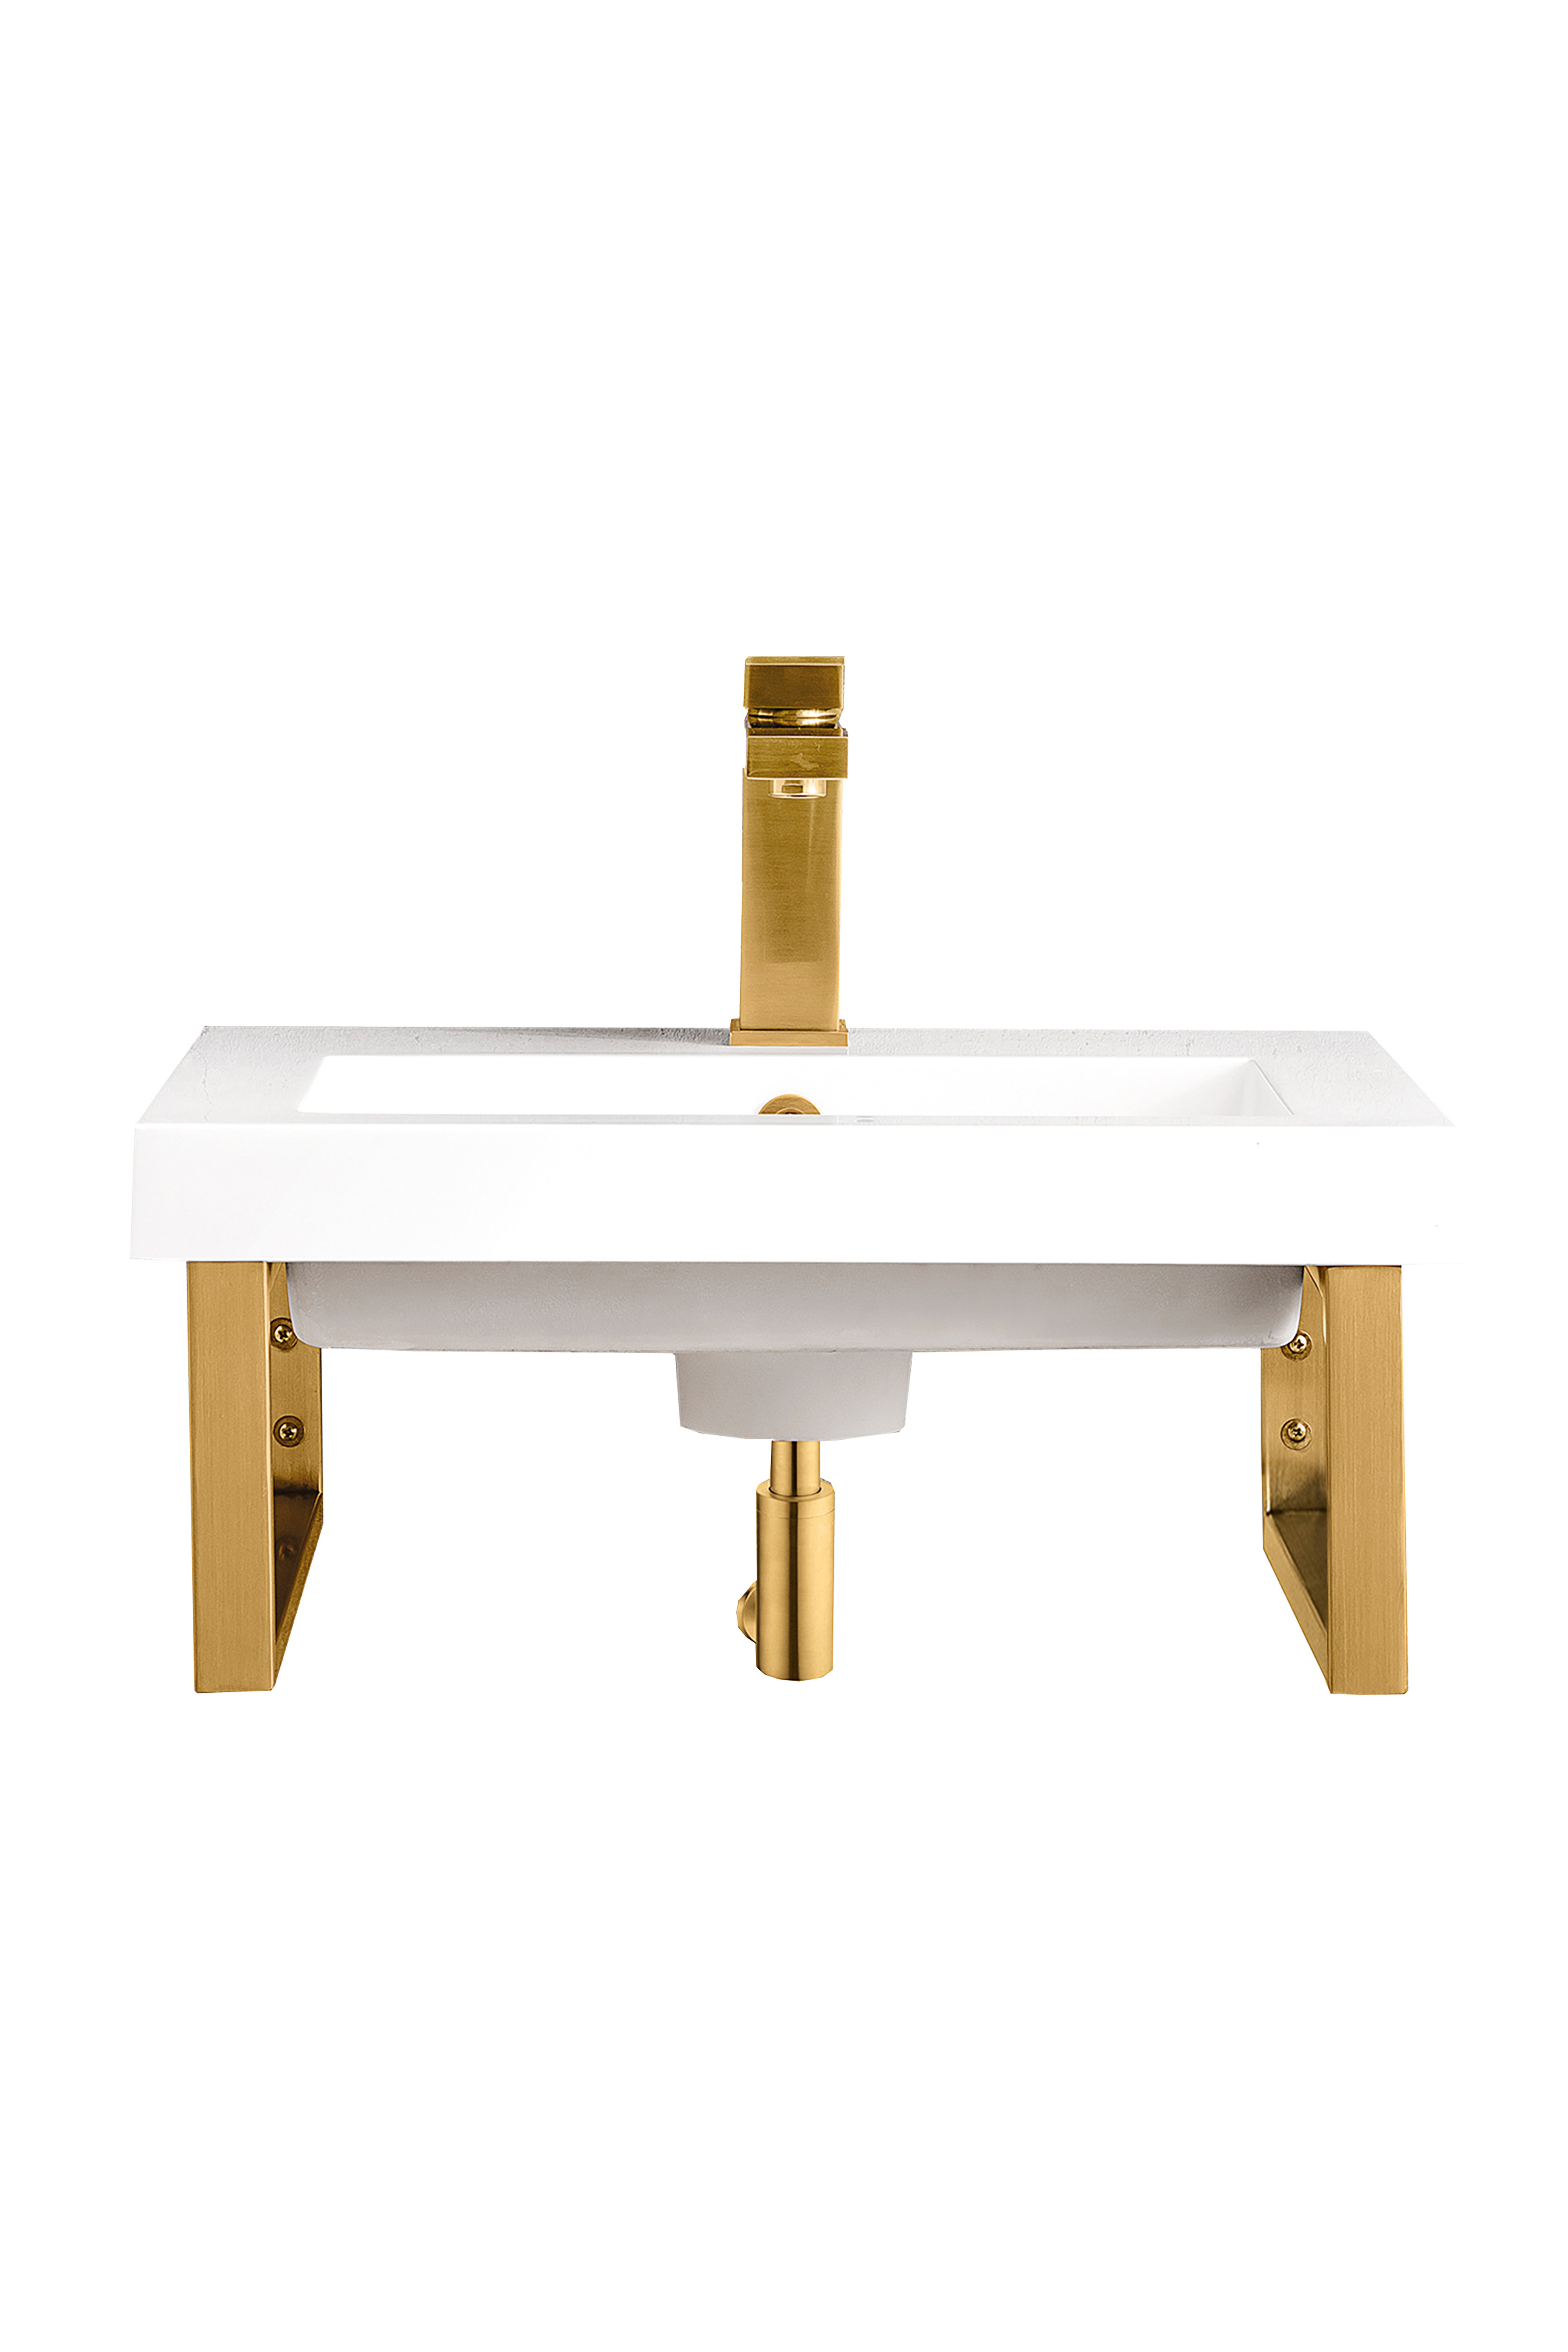 James Martin 055BK16RGD20WG2 Two Boston 15 1/4" Wall Brackets, Radiant Gold w/20" White Glossy Composite Countertop